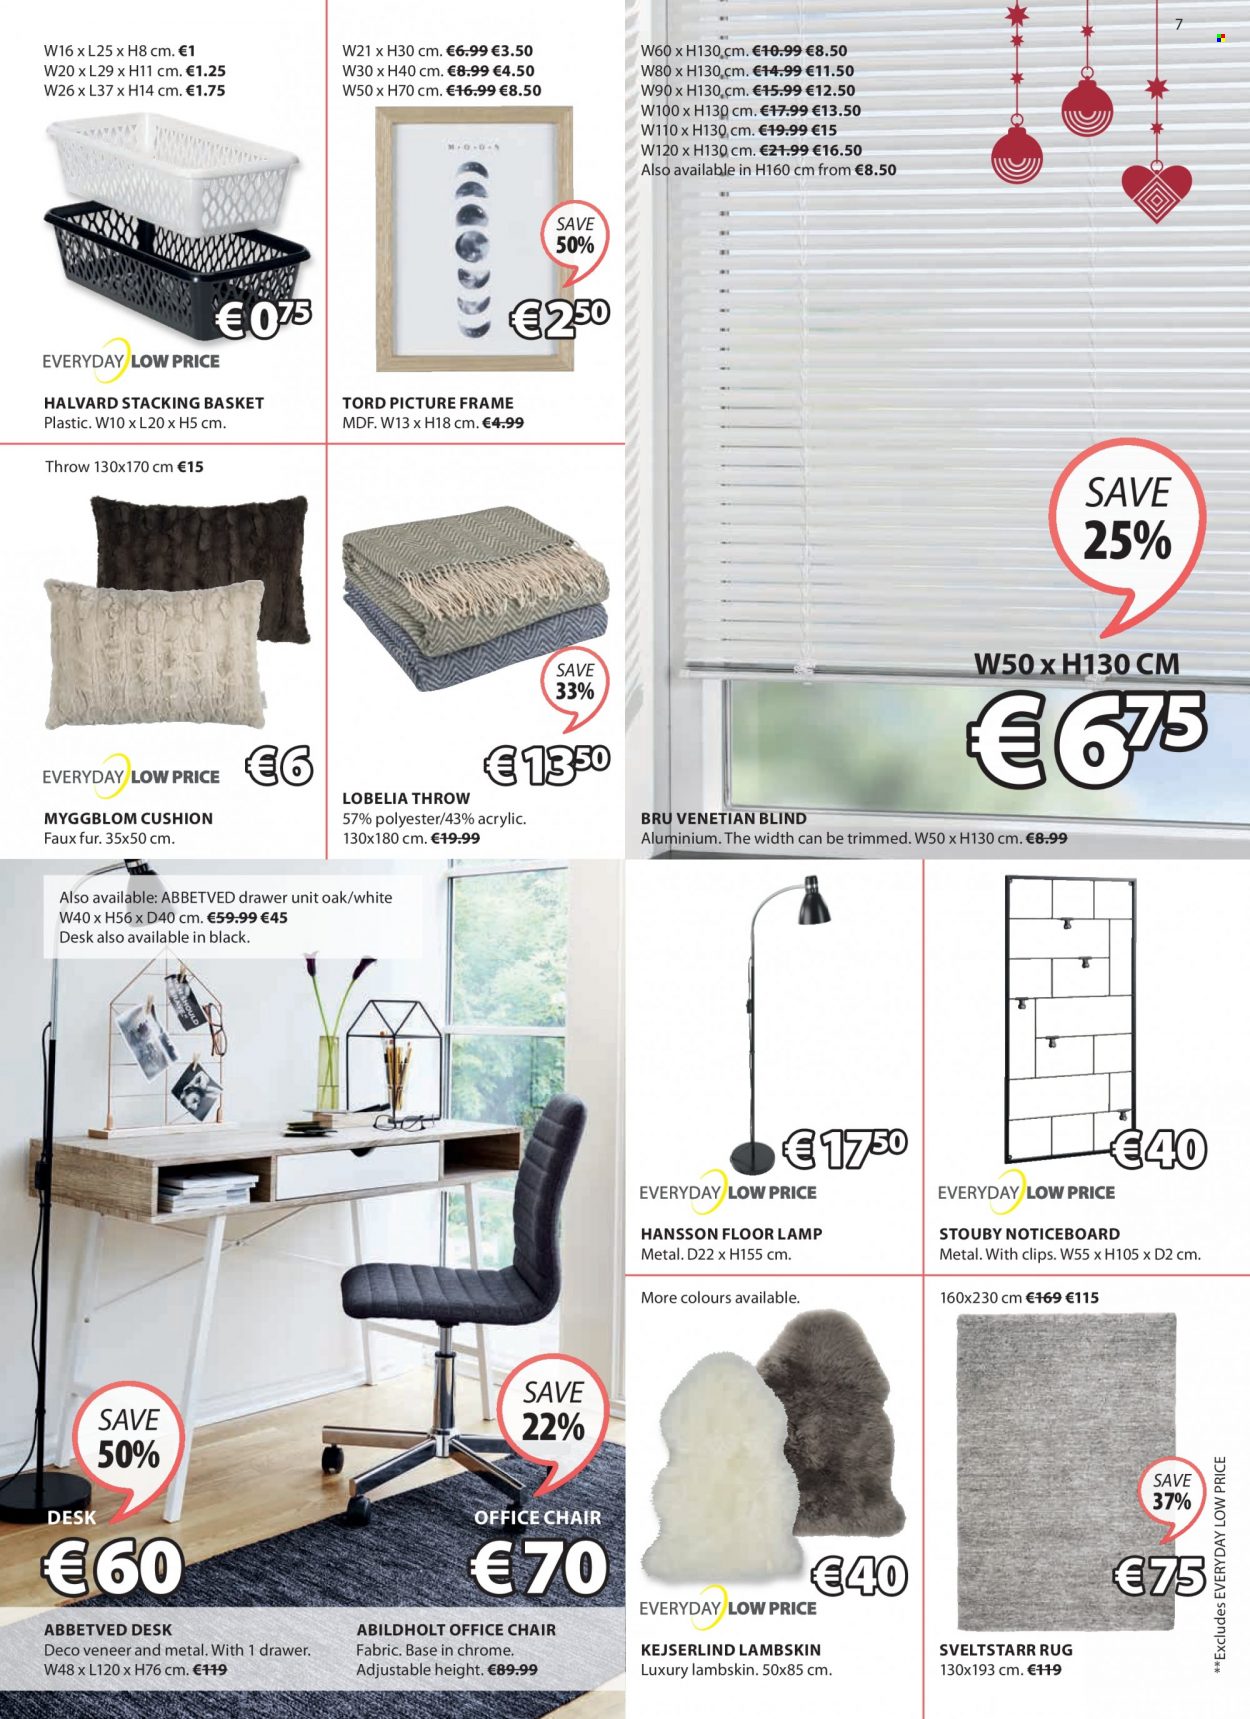 thumbnail - JYSK offer  - 18.11.2021 - 01.12.2021 - Sales products - chair, drawer base, locker desk, desk, office chair, cabinet with drawers, cushion, picture frame, basket, wool throw, lamp, floor lamp, rug. Page 7.